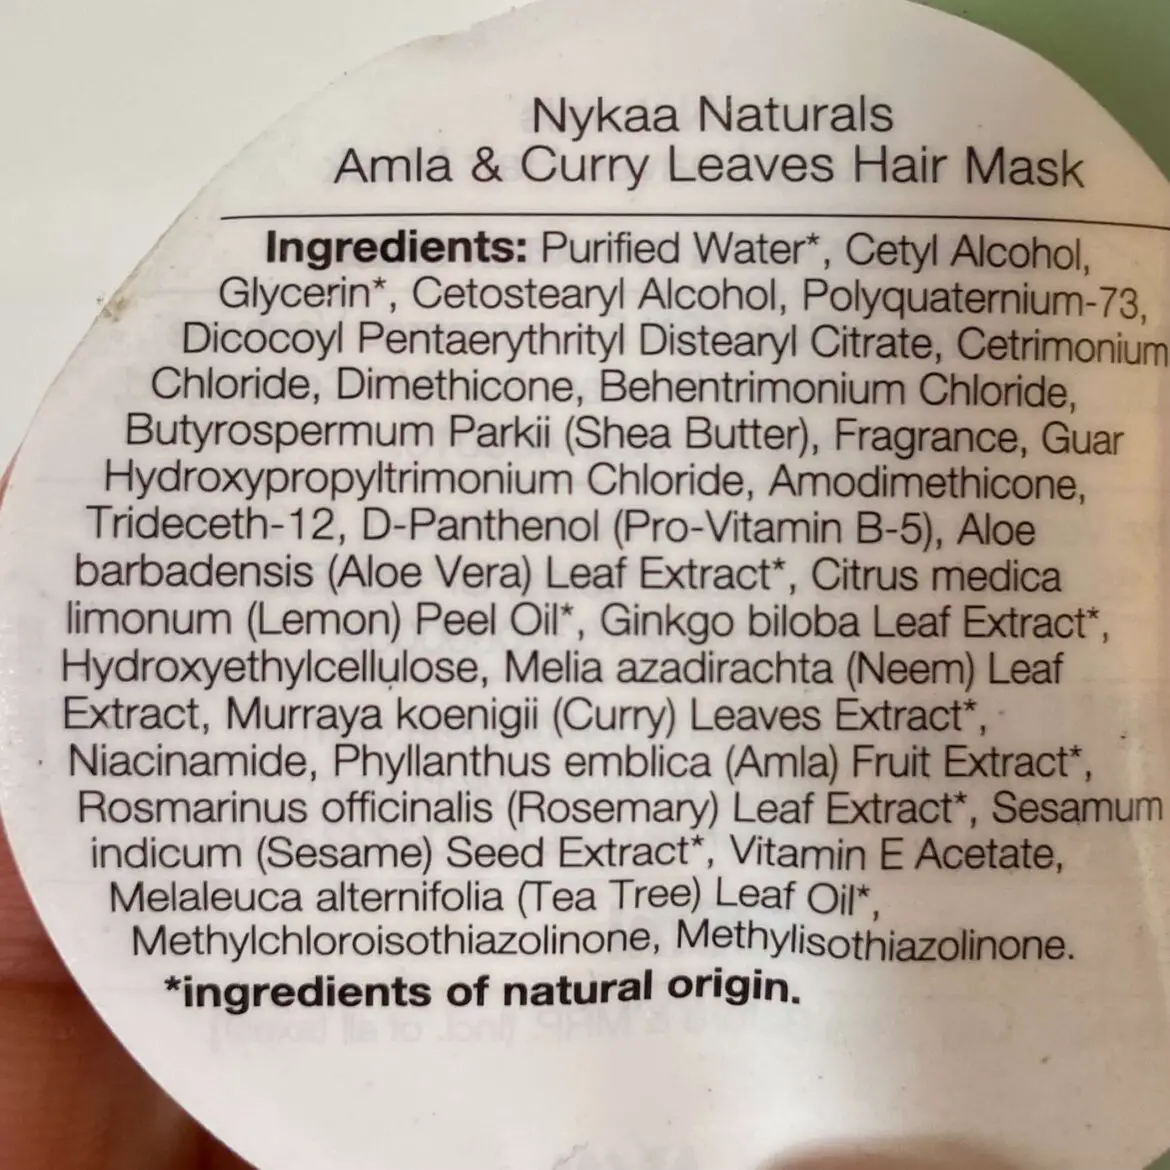 Nykaa Naturals Amla and Curry Leaves Hair Mask Ingredients